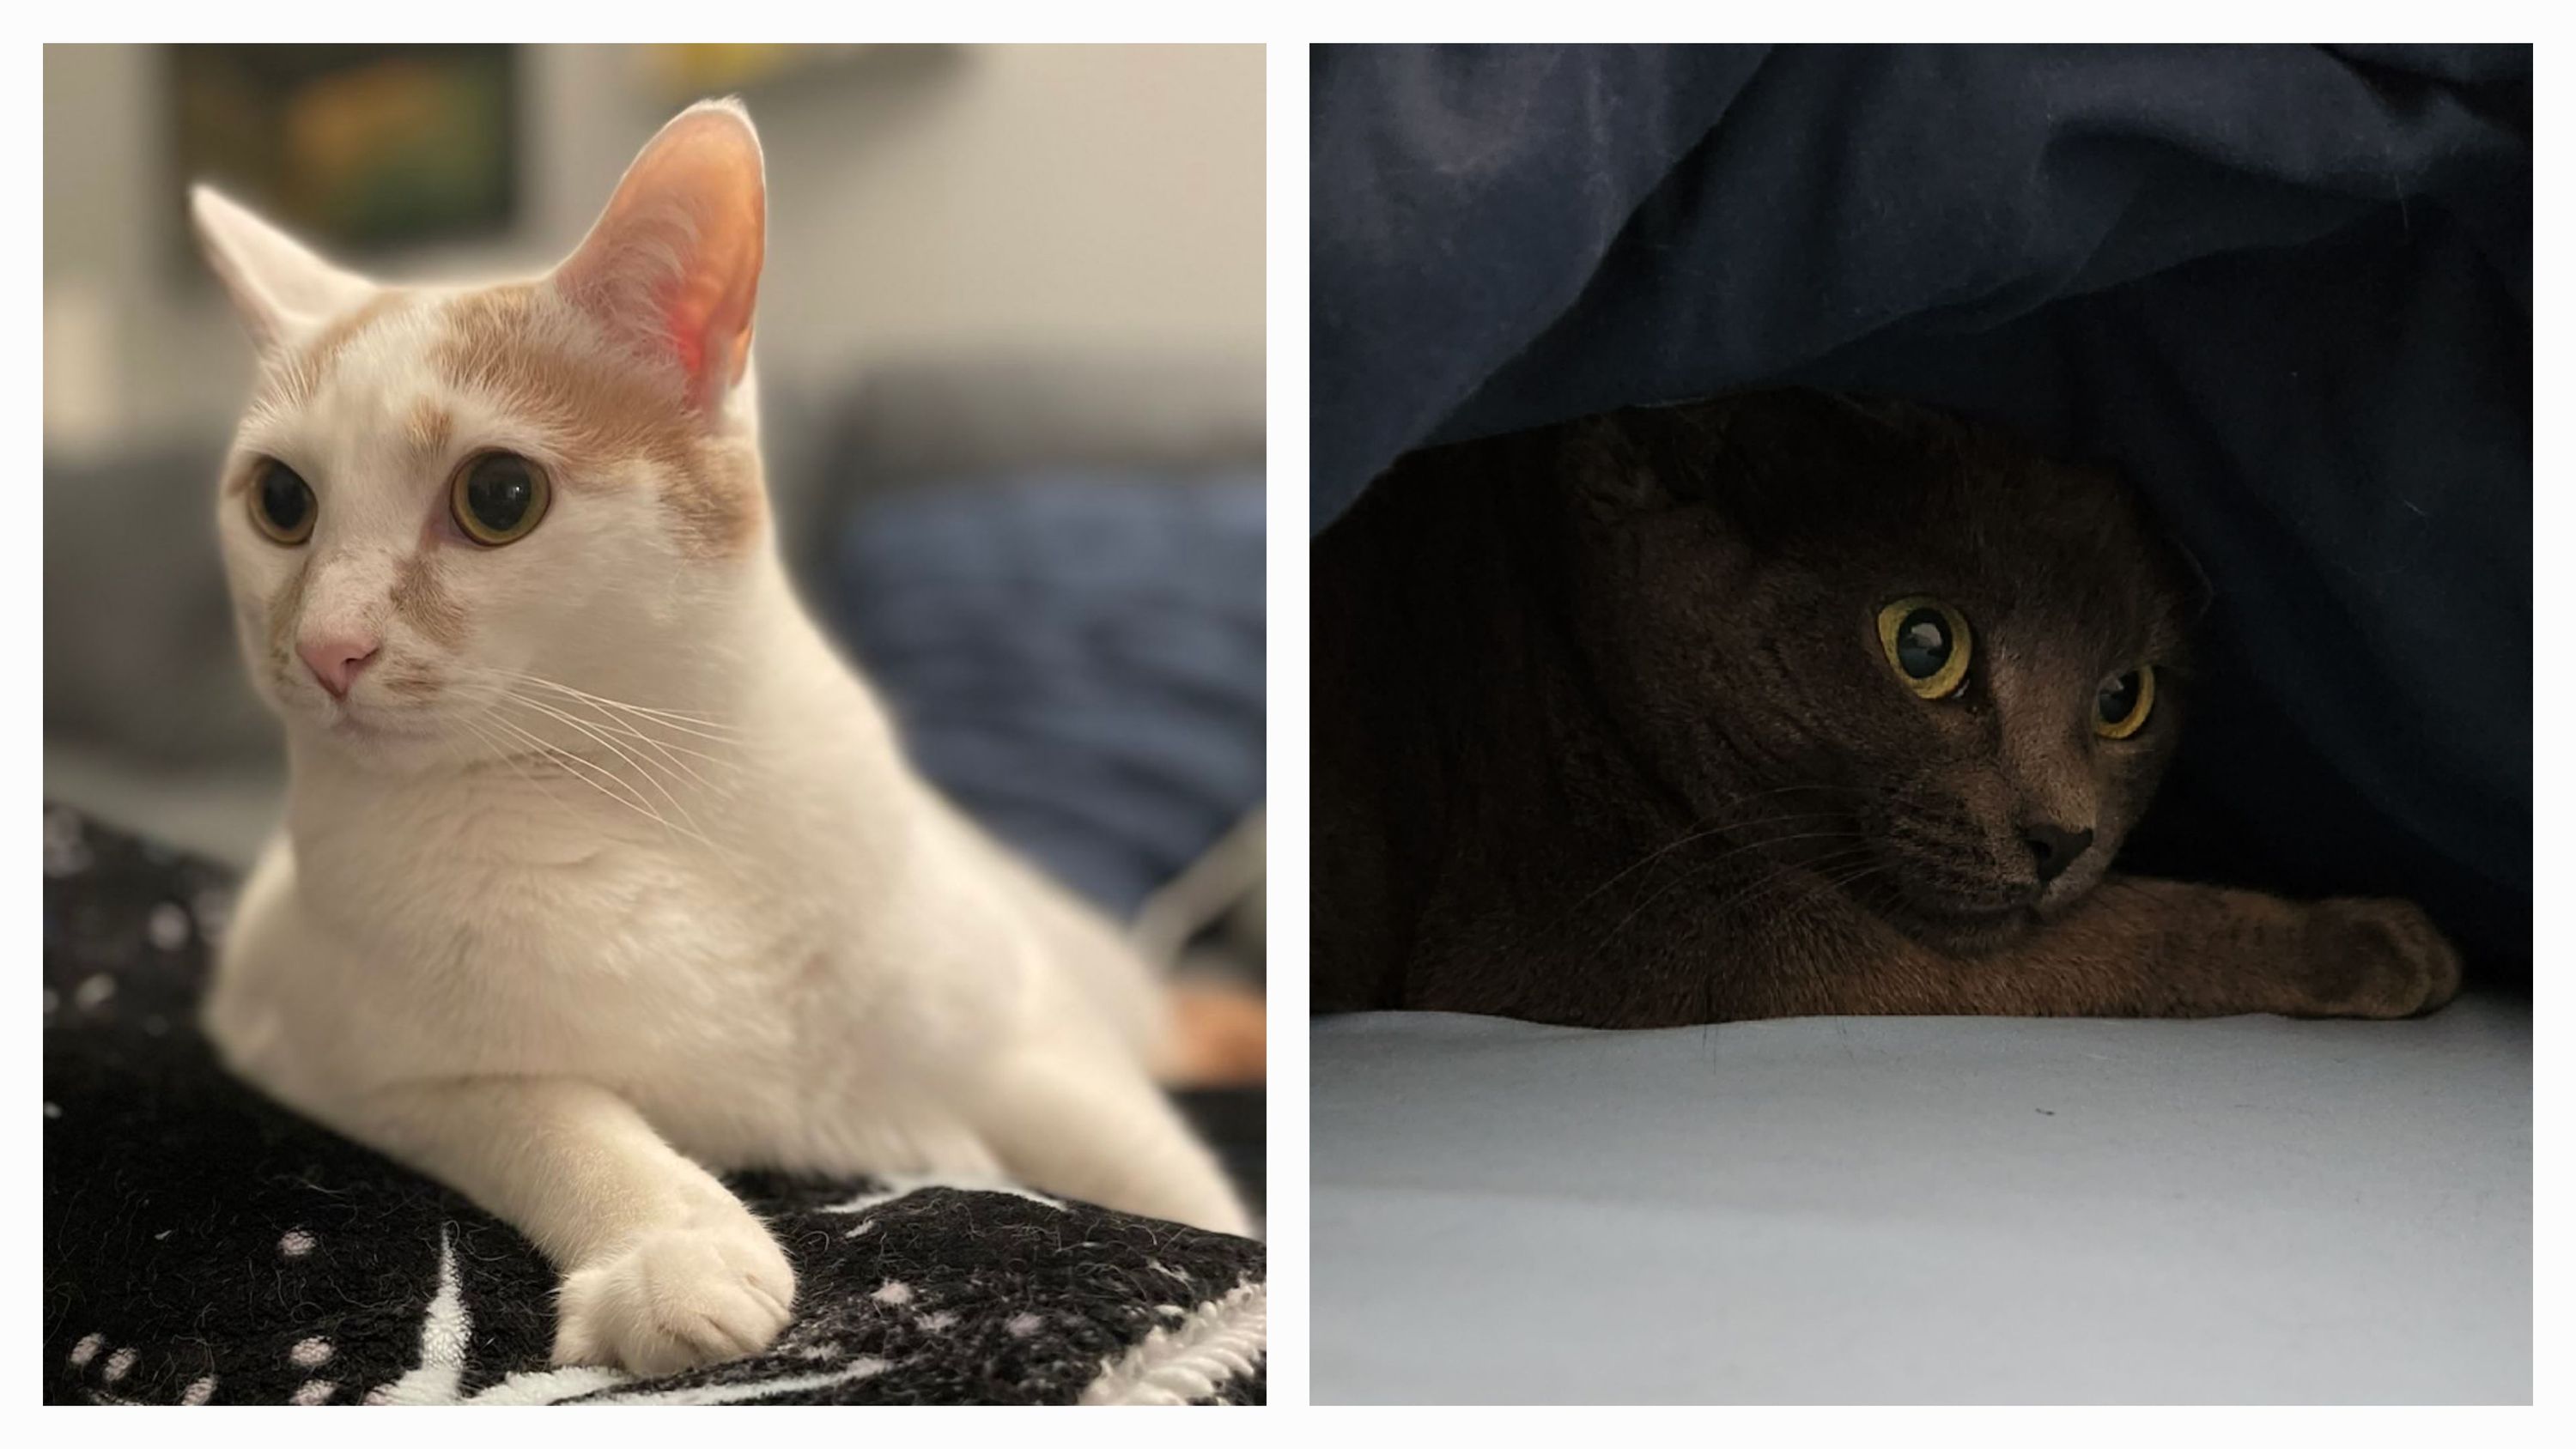 Two photos. On the left, a white cat with orange spots looks alert and slightly glowing in the light. On the right, a grey cat’s face peers out from under some covers.